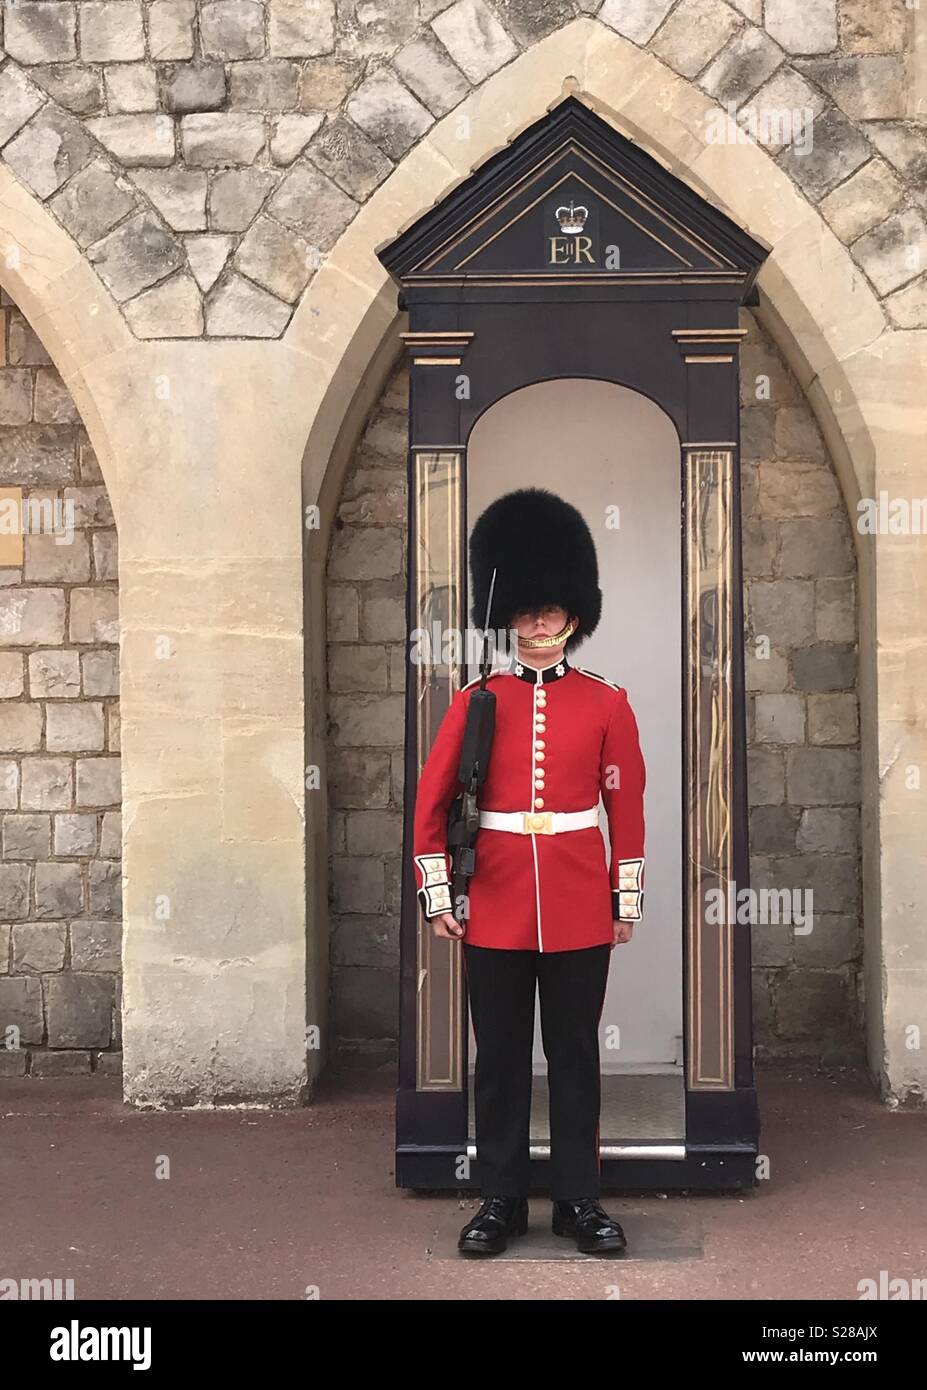 One of the Queen’s guards at Windsor Castle, England Stock Photo